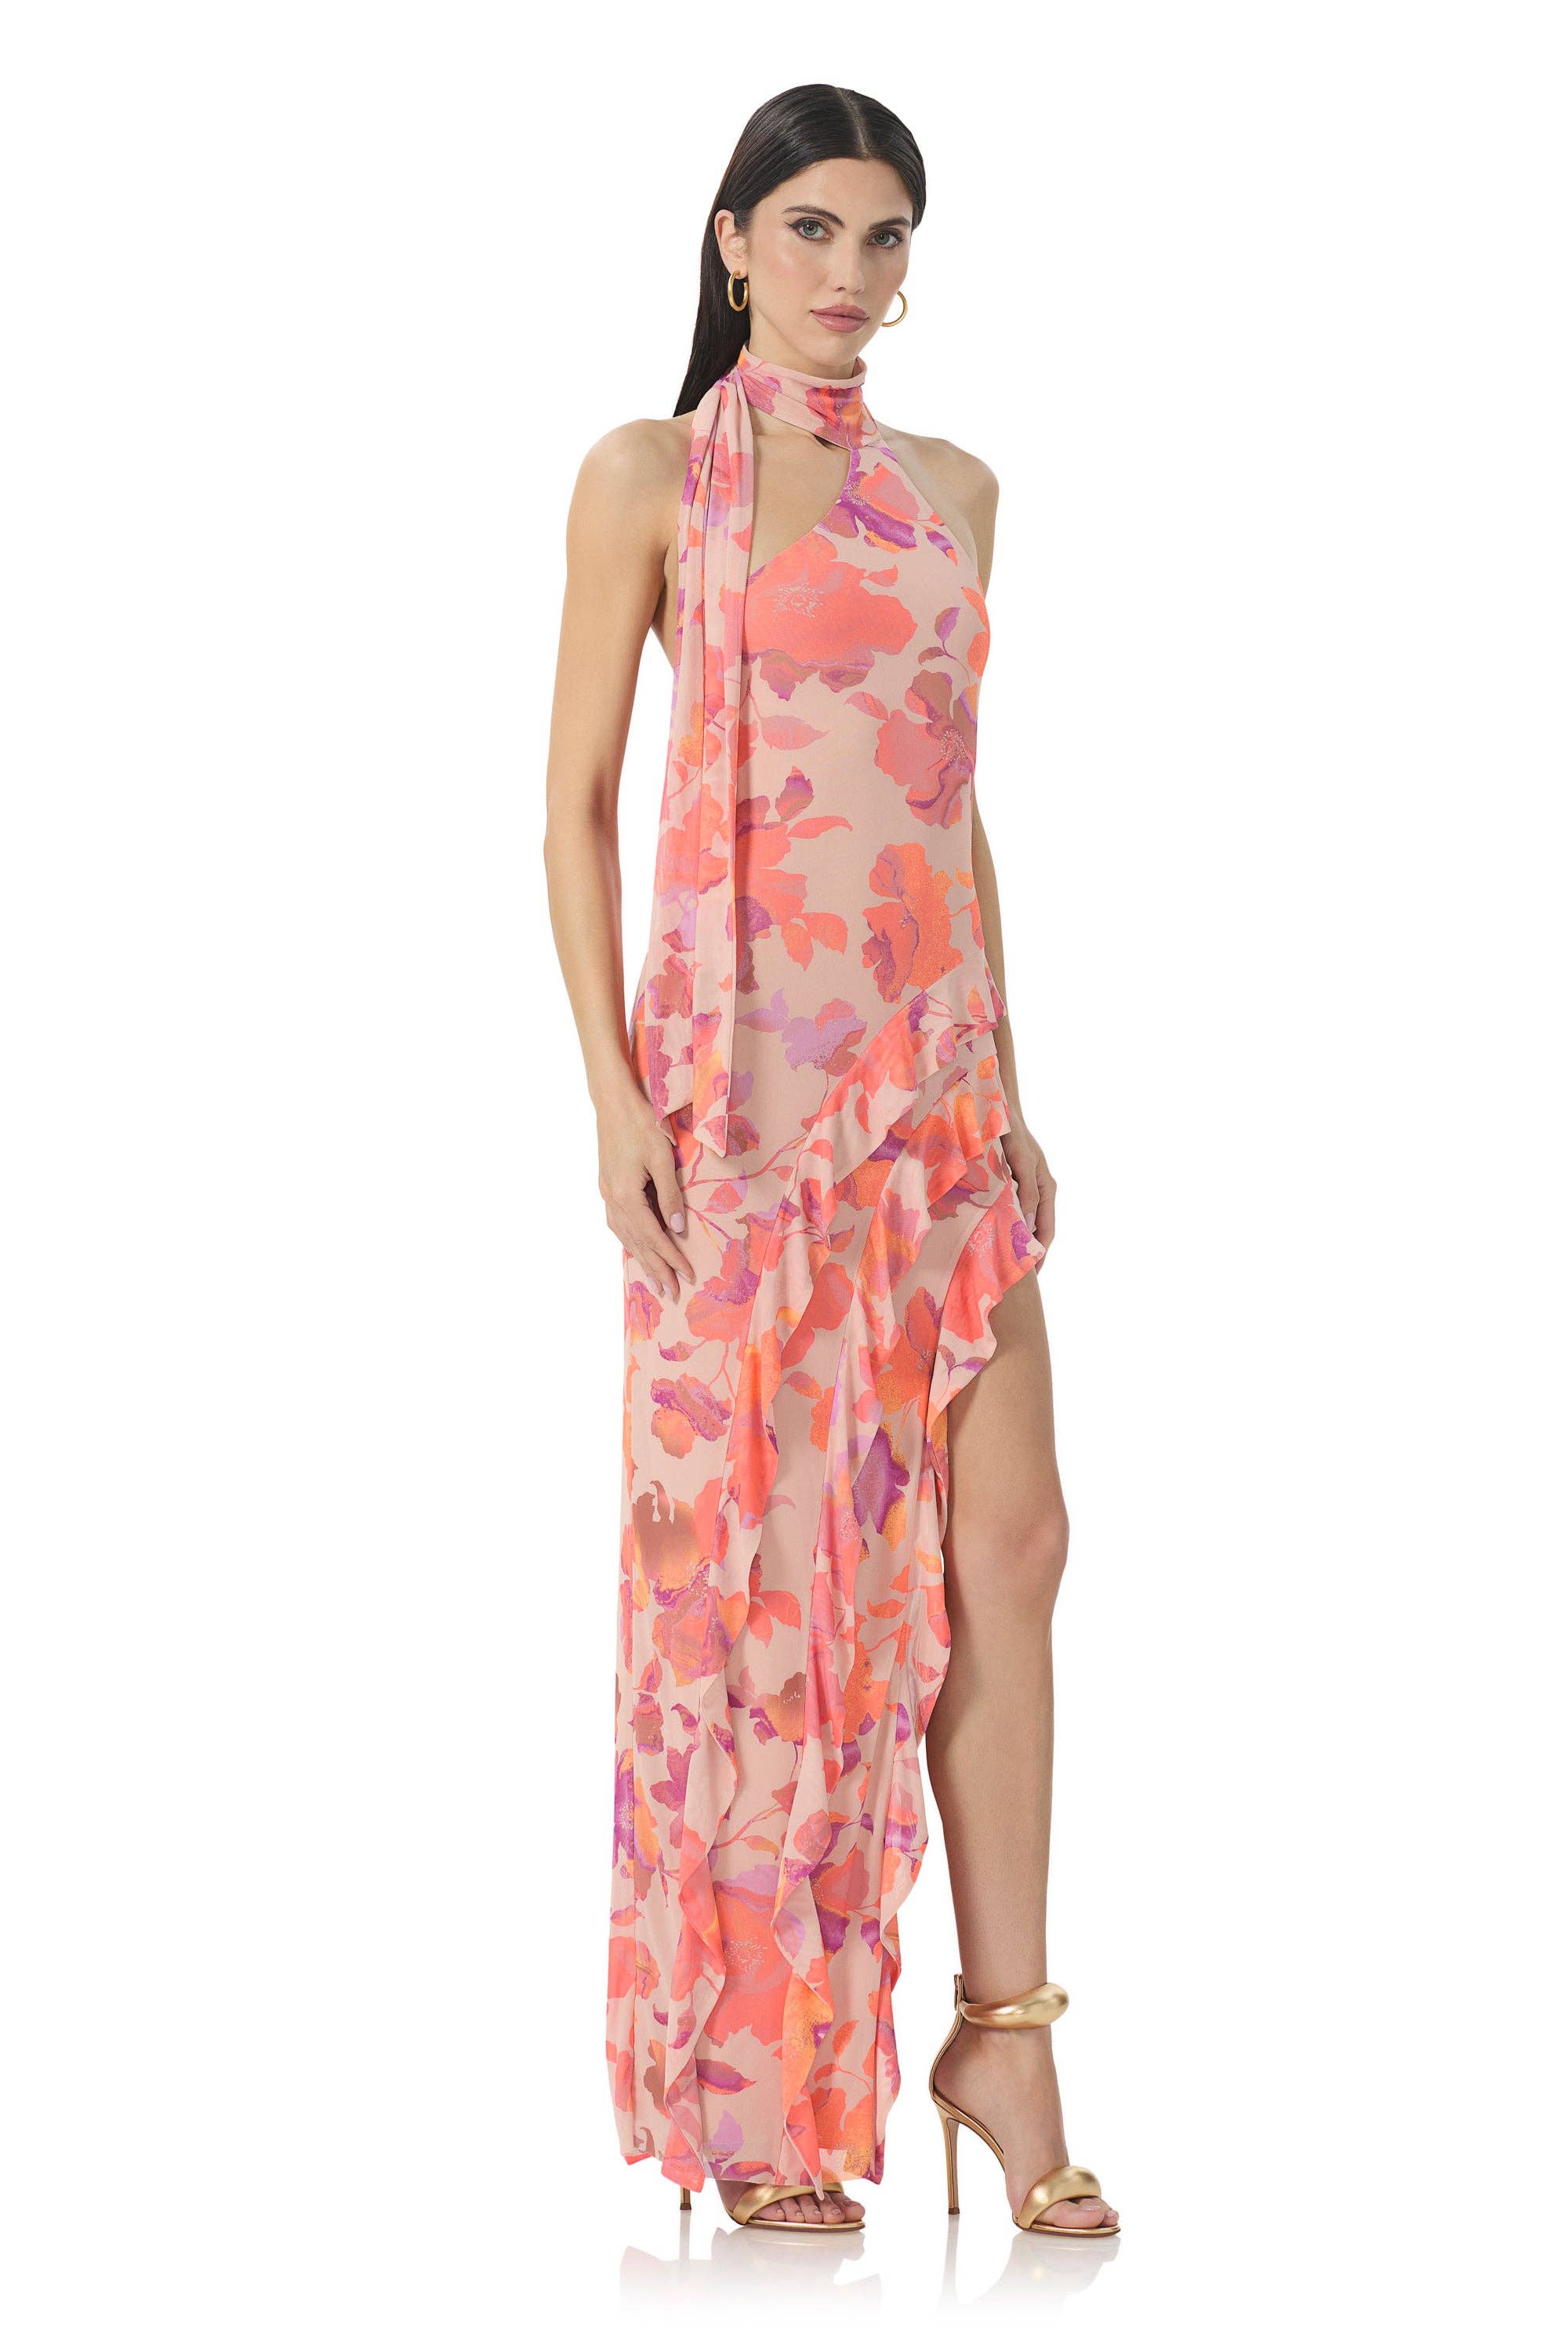 AFRM - Desiree Ruffle Maxi Dress - Nude Marble Floral